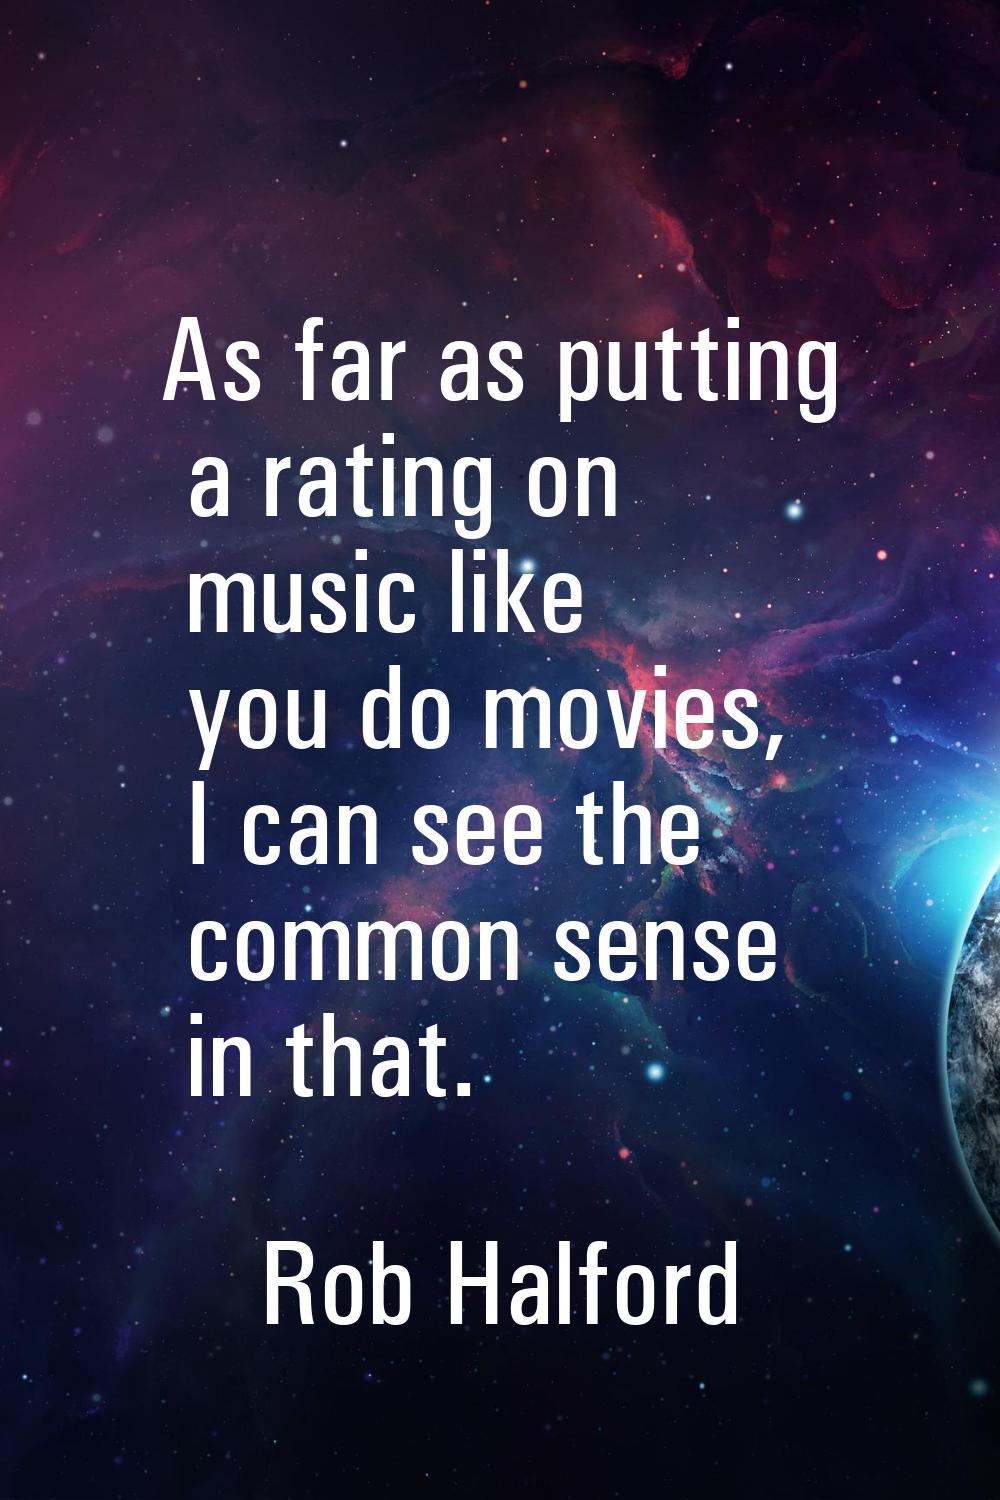 As far as putting a rating on music like you do movies, I can see the common sense in that.